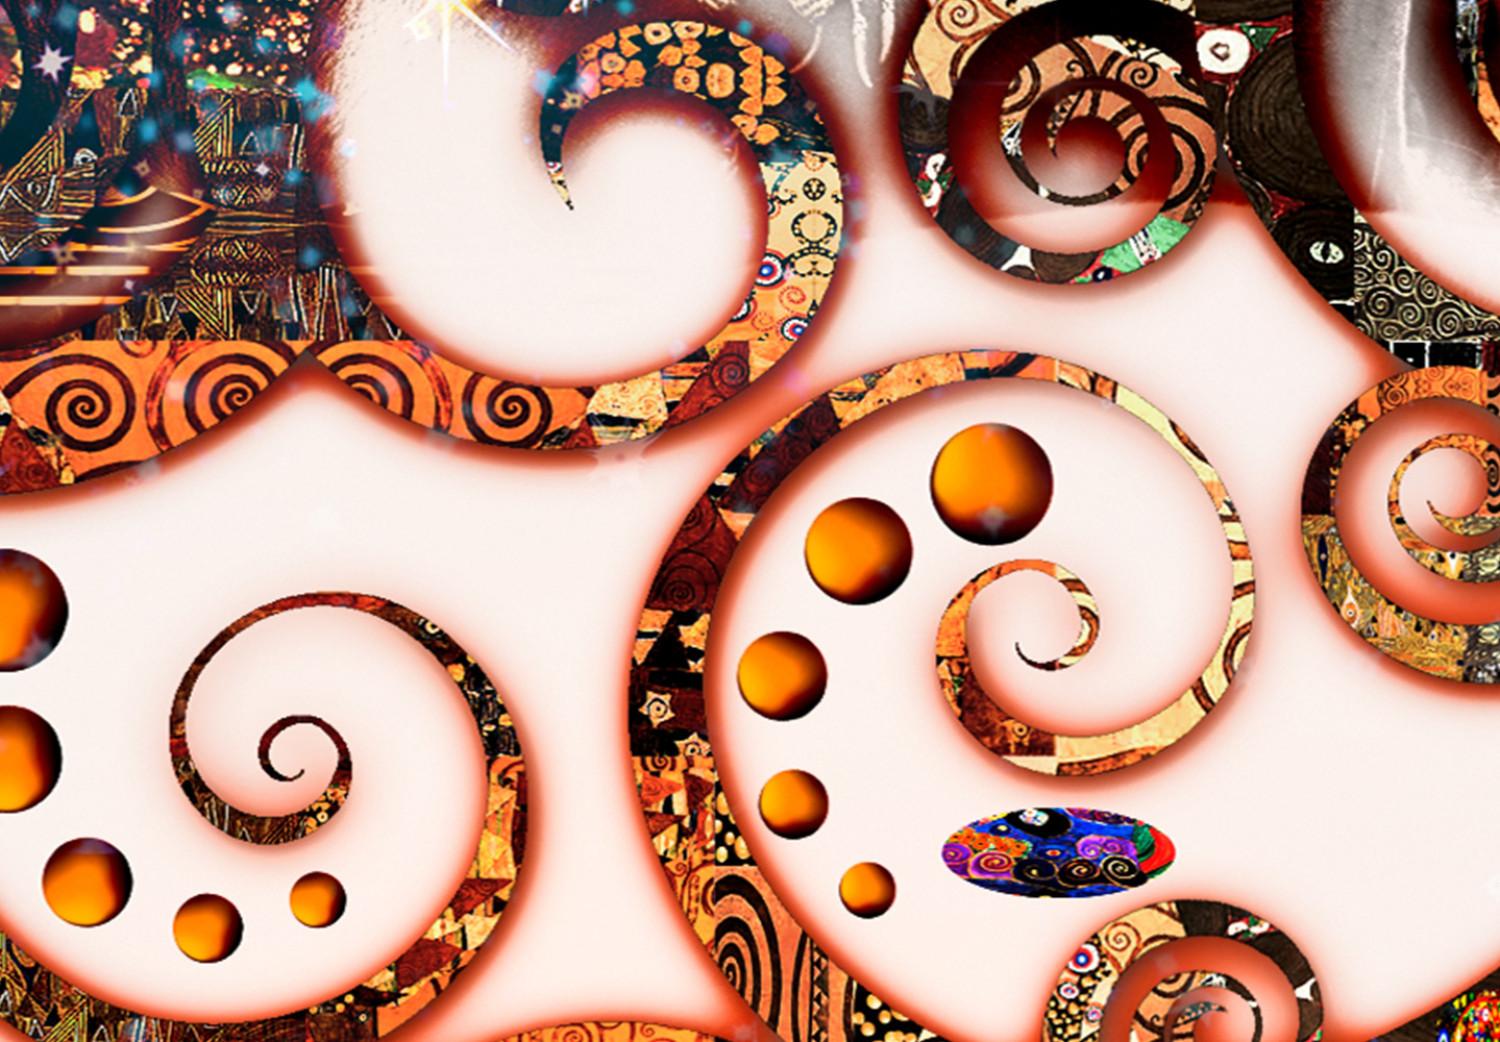 Canvas Tree in the Style of Gustav Klimt - Colorful Art Nouveau Abstraction According to the Master